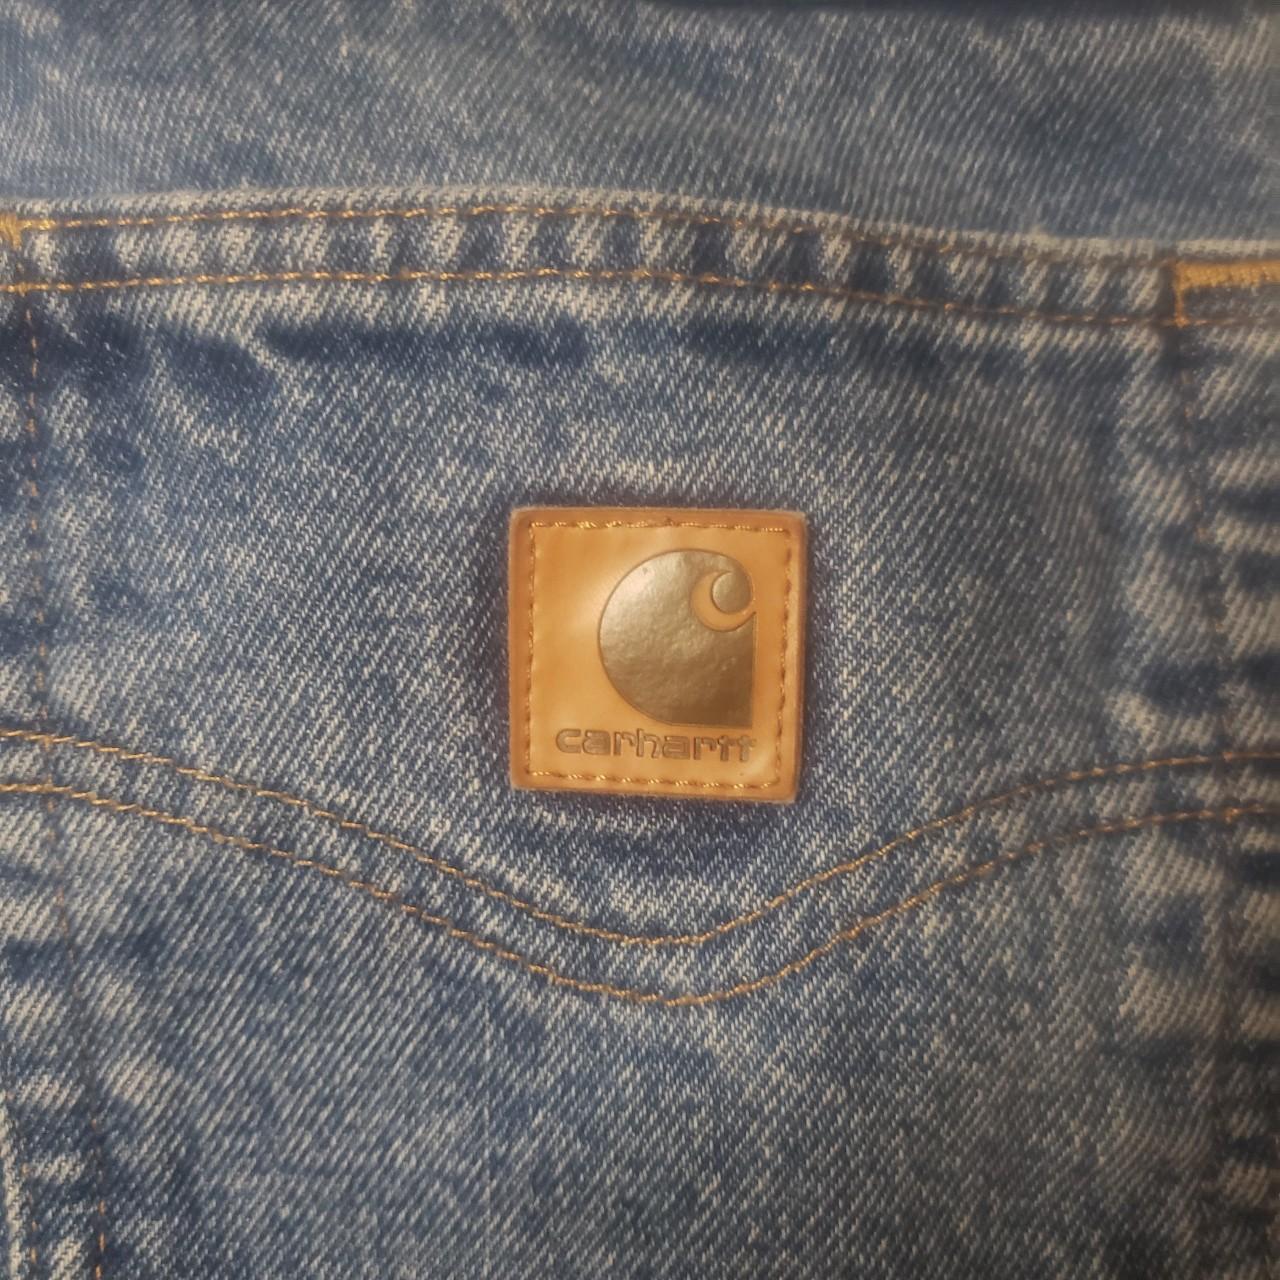 Carhartt B17 DST Jeans Size 36x30. Faded but great... - Depop